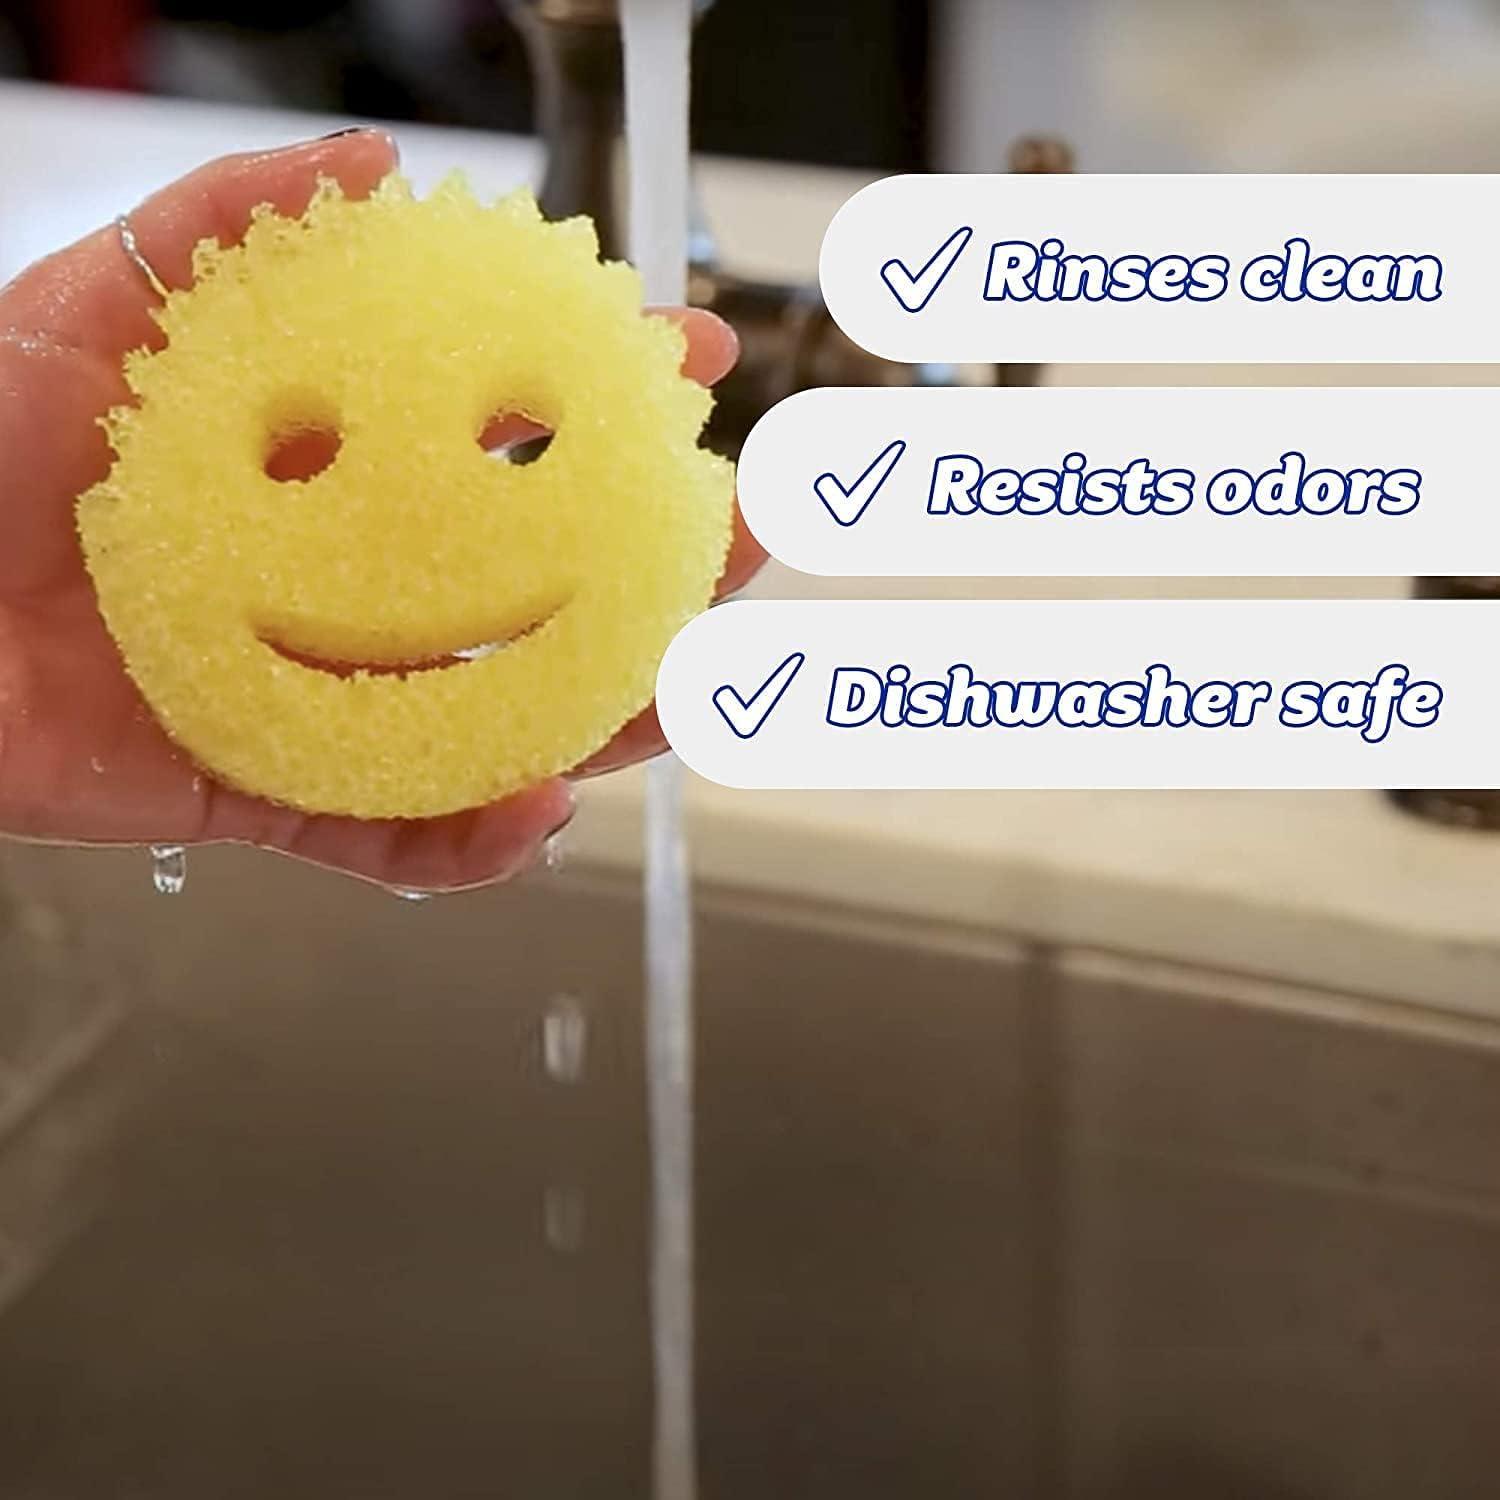 Scrub Daddy Sponge - Summer Shapes - Non- Scratch Scrubbers for Dishes and  Home - 3 Count